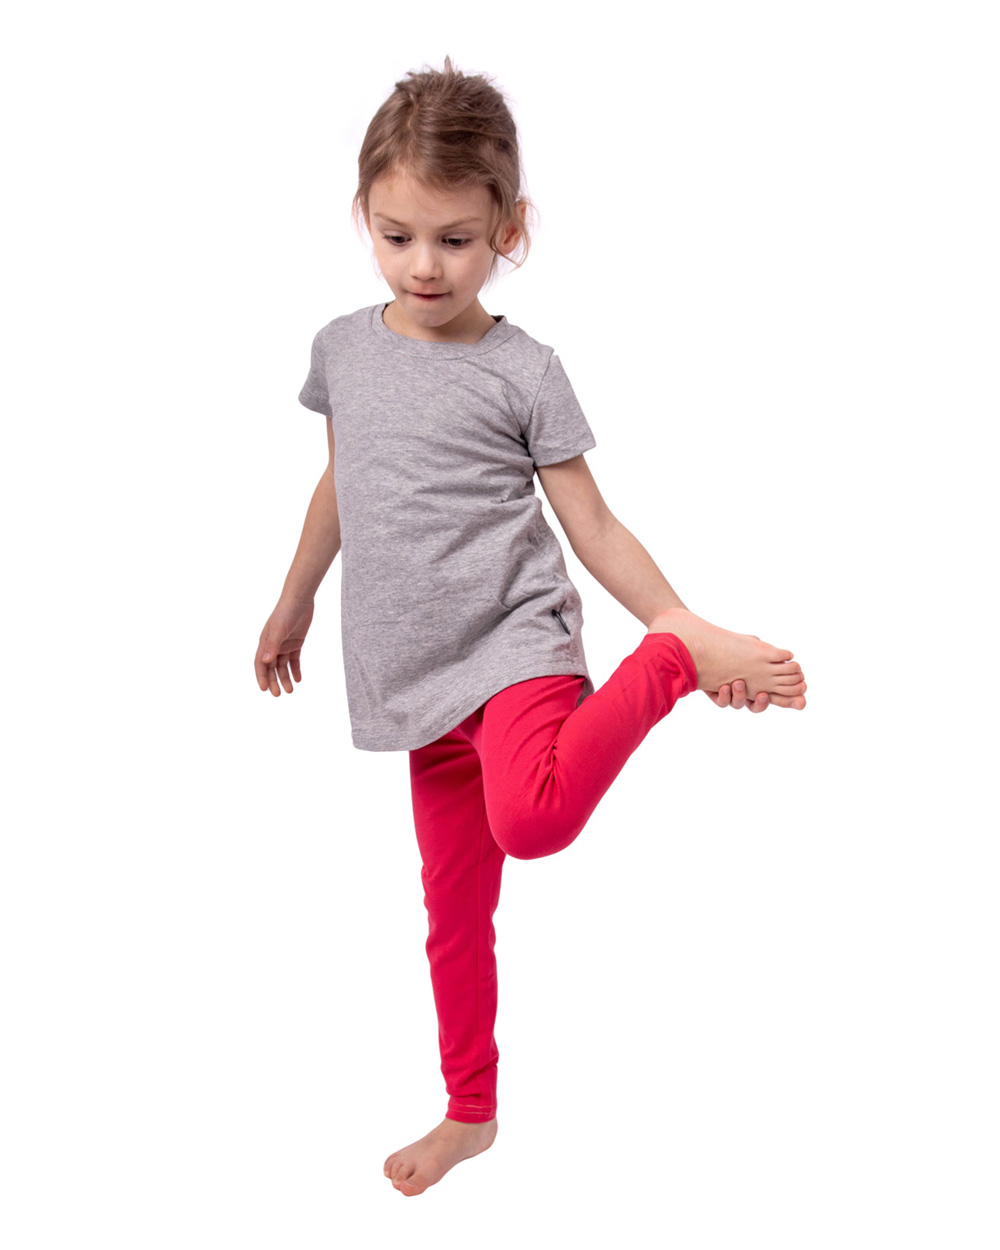 Buy BOOPH Girls Winter Legging Pant Cable Knit Fleece Lined Tight 4-5 Years  Red1 at Amazon.in